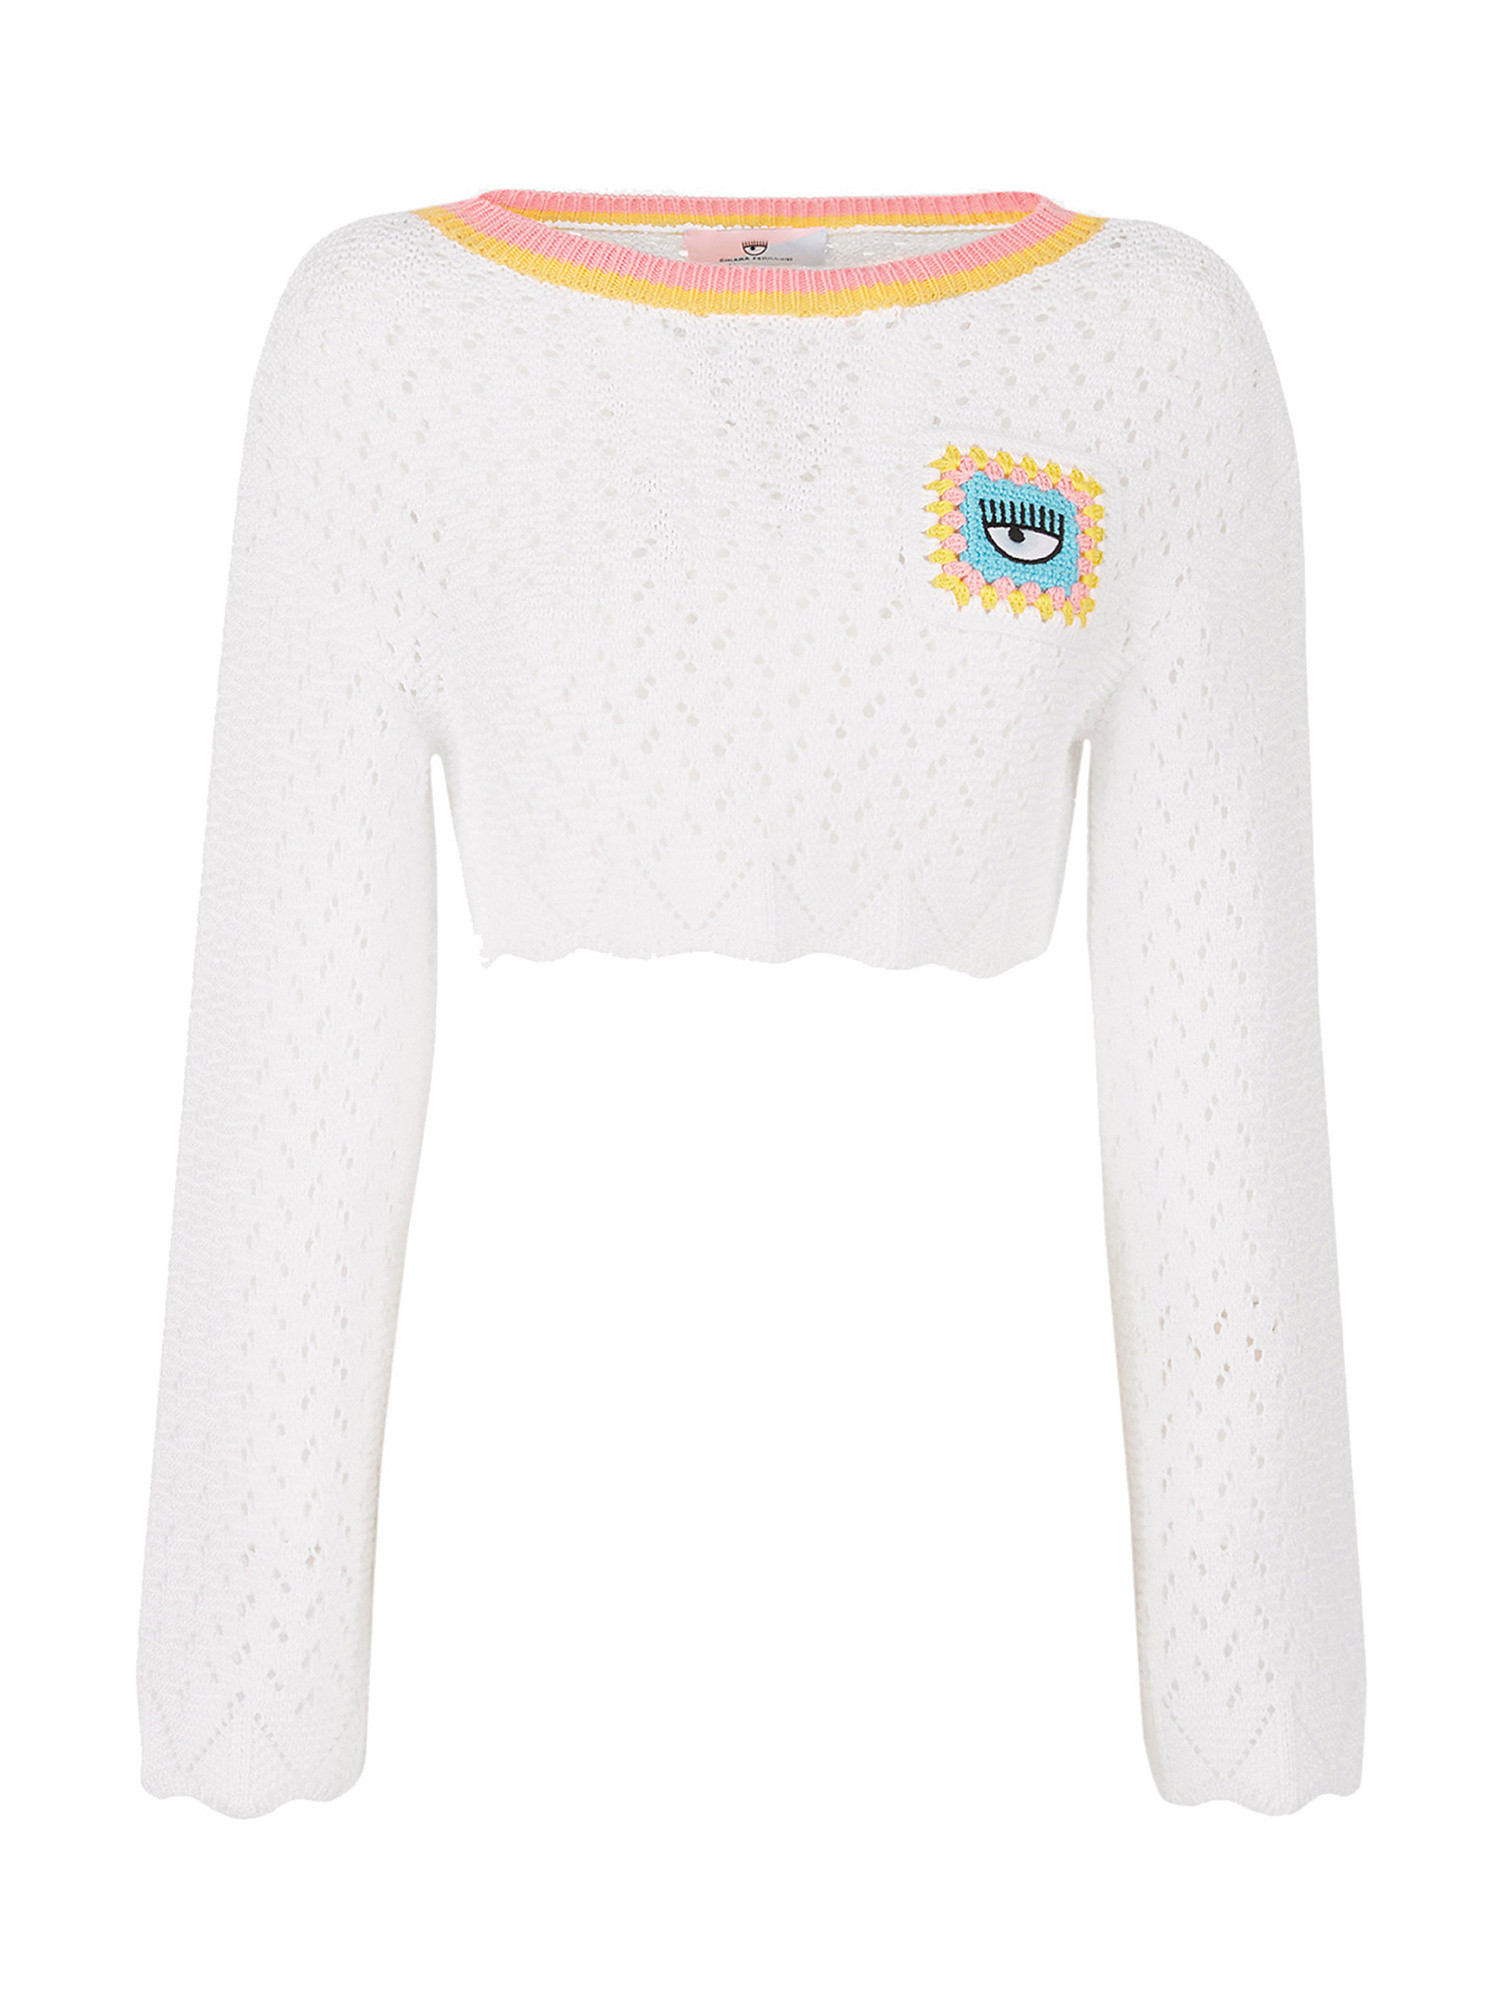 Crochet top with logo, White, large image number 0